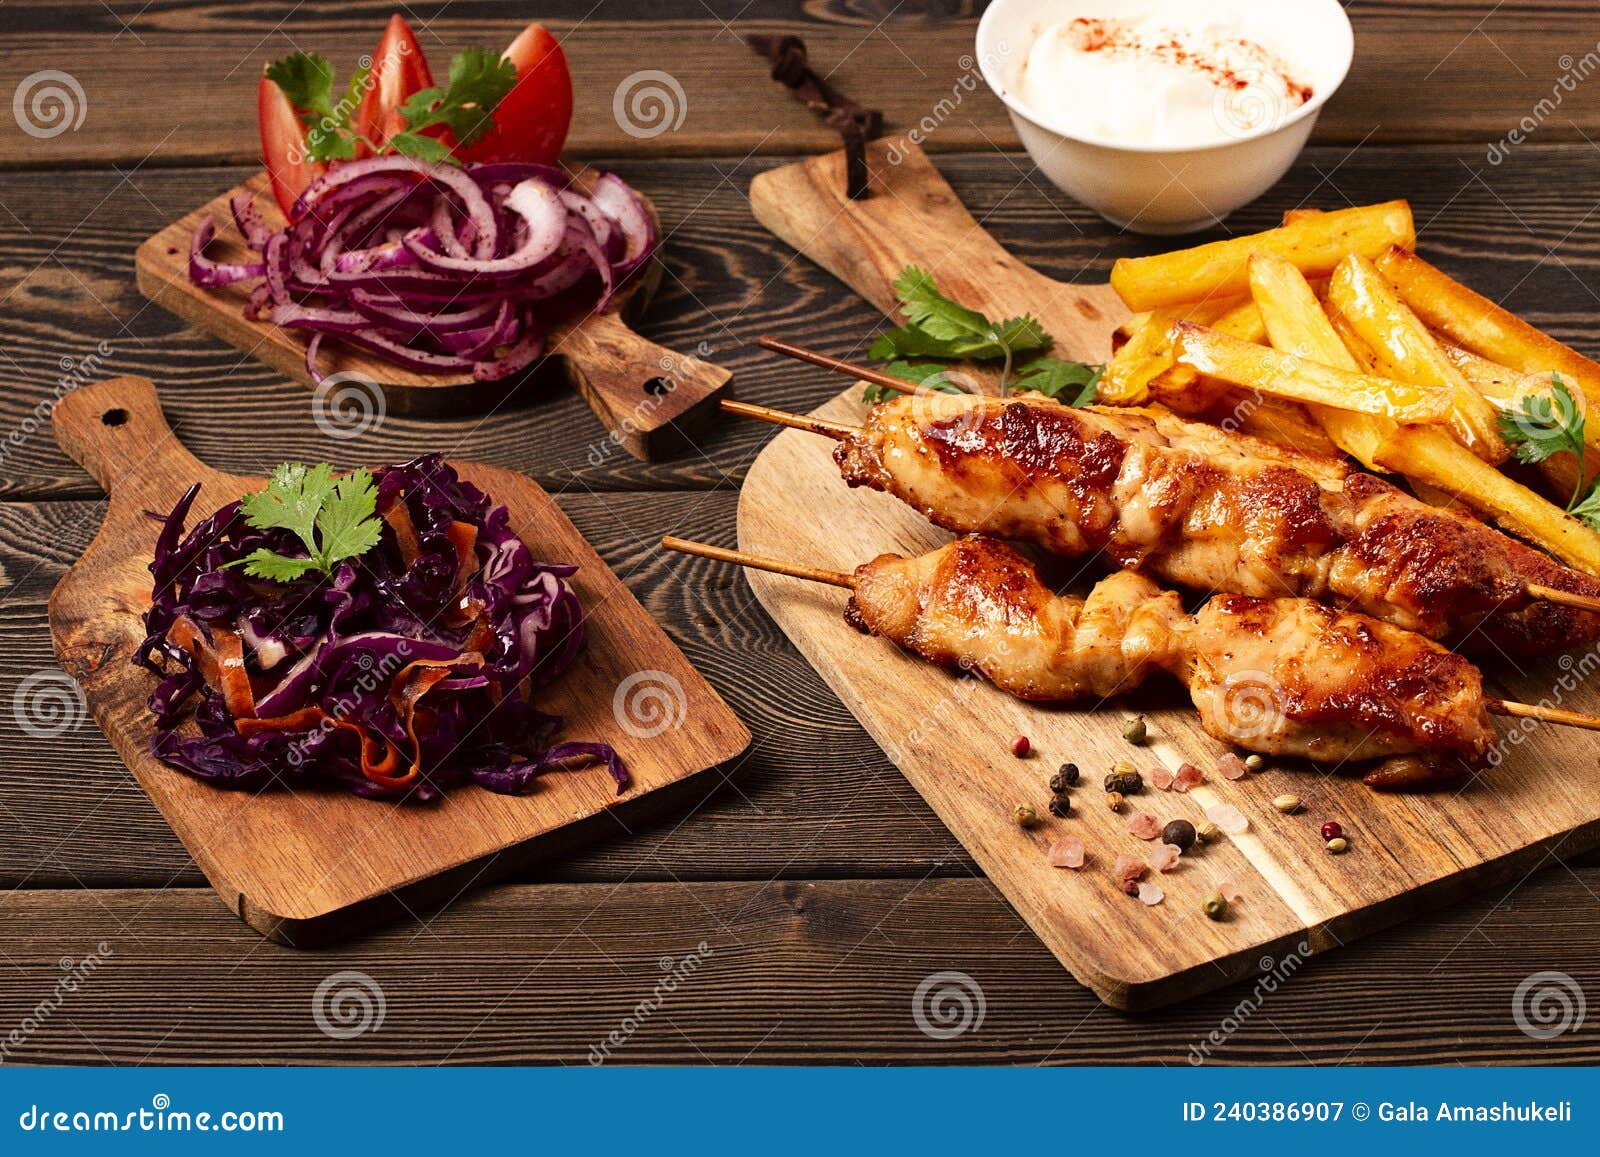 Arabic Traditional Cuisine, Shish Tawk with Potatoes and Red Cabbage ...